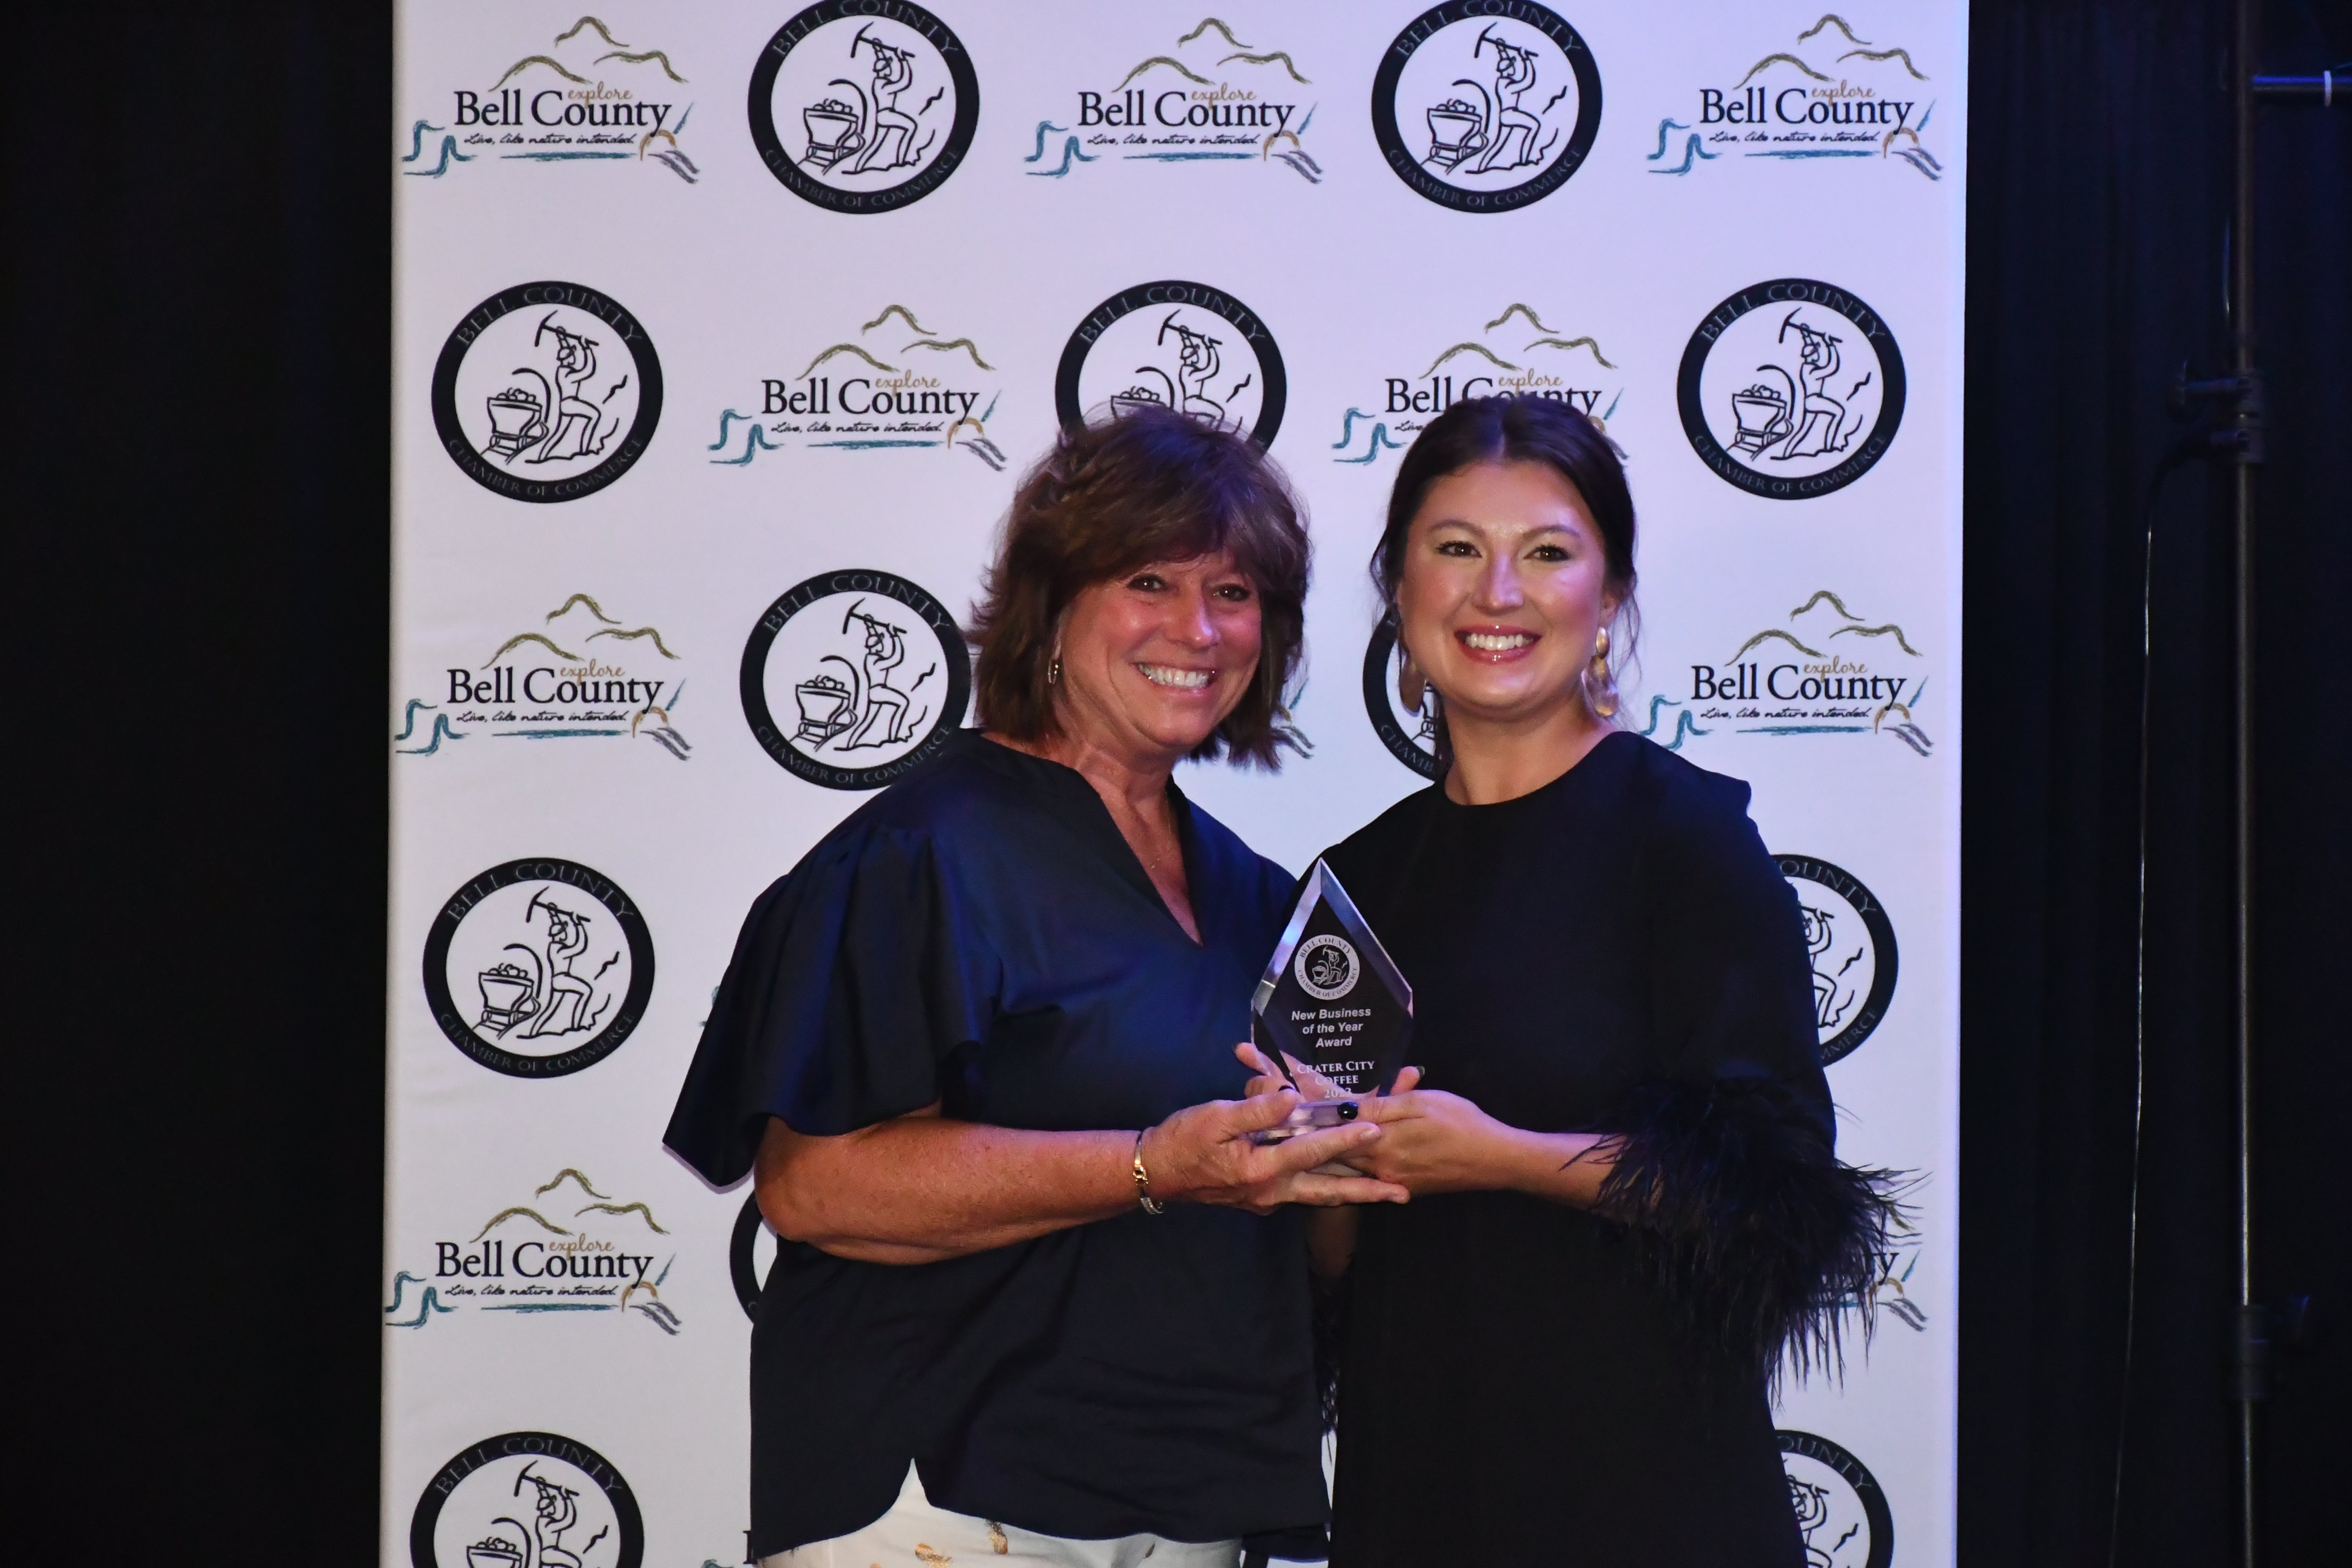 NEW BUSINESS OF THE YEAR WINNER CRATER CITY COFFEE (LEFT) WITH CHAMBER OF COMMERCE DIRECTOR MELISSA TURNER (RIGHT)